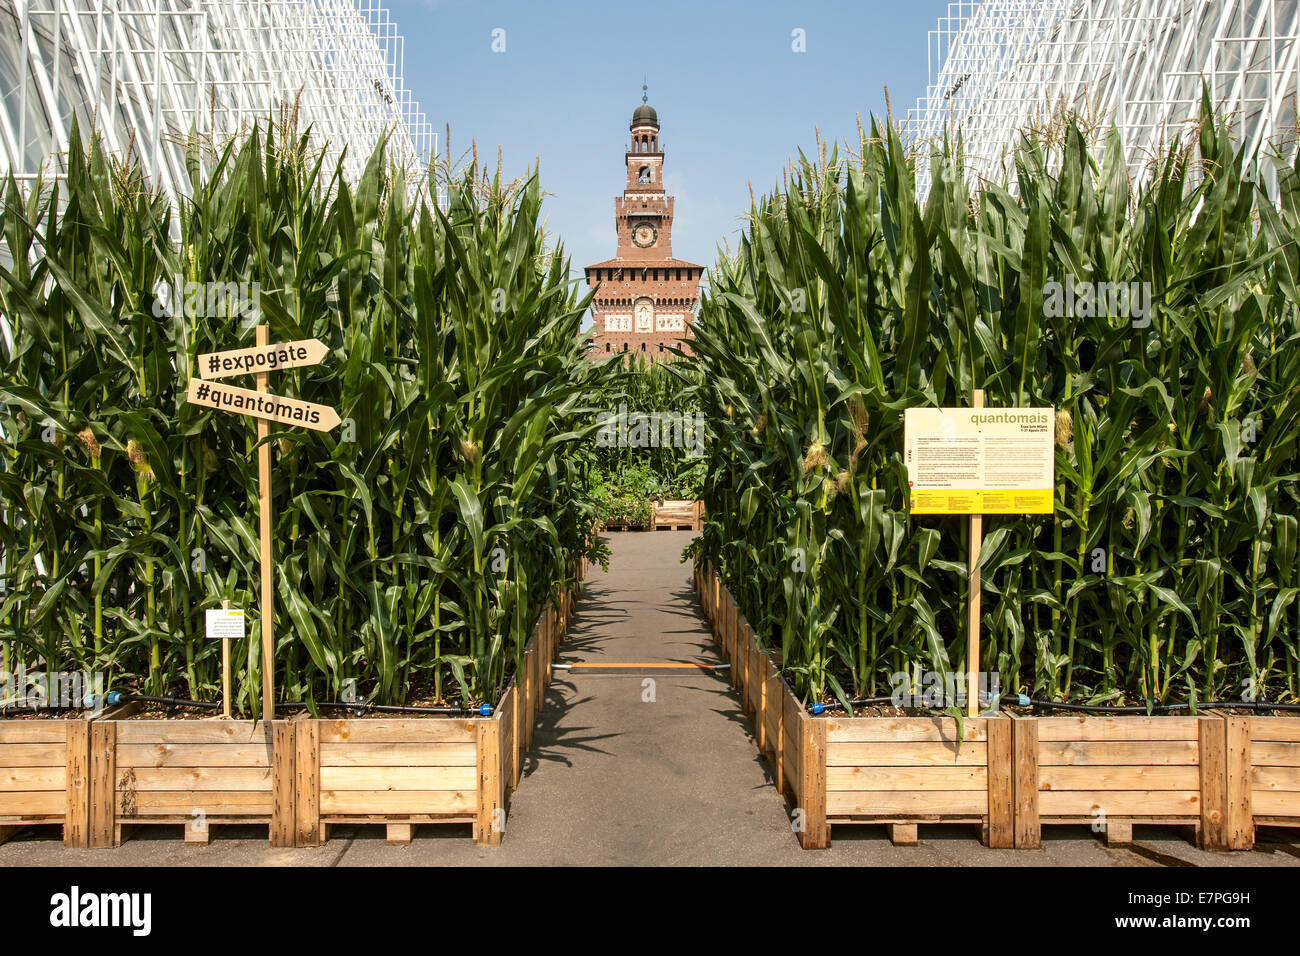 Milan, Expo 2015, EXPOGATE, Fair Universal, Sforzesco castle, city, gate, infopoint, signpost, corn flower beds, Lombardy, Italy Stock Photo